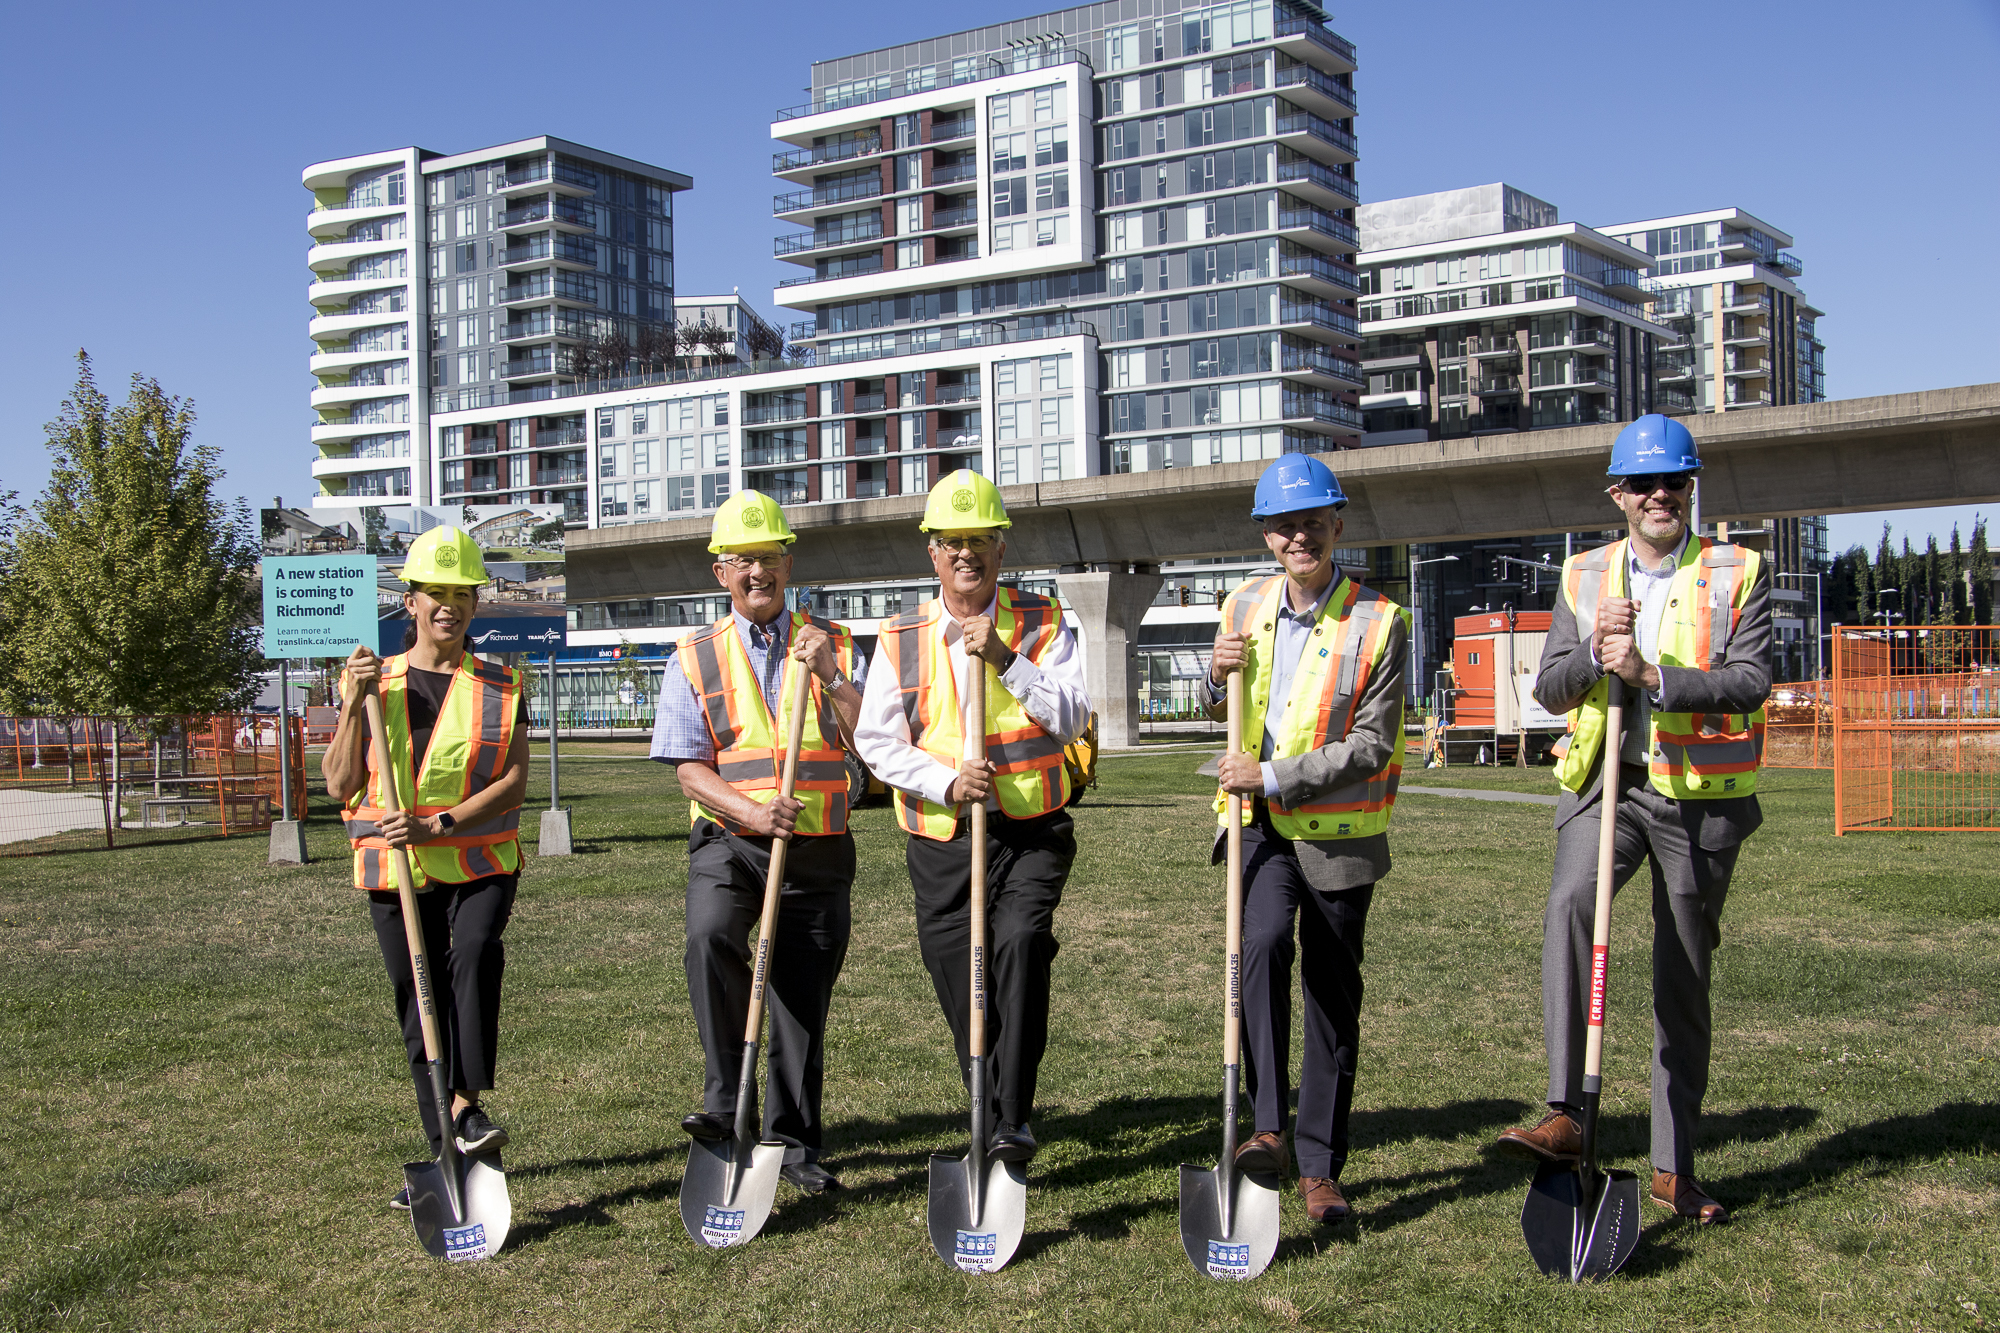 Various planner and politicians wear hard hats and high visibility vets while holding shovels on the grass where the new Capstan Station will be